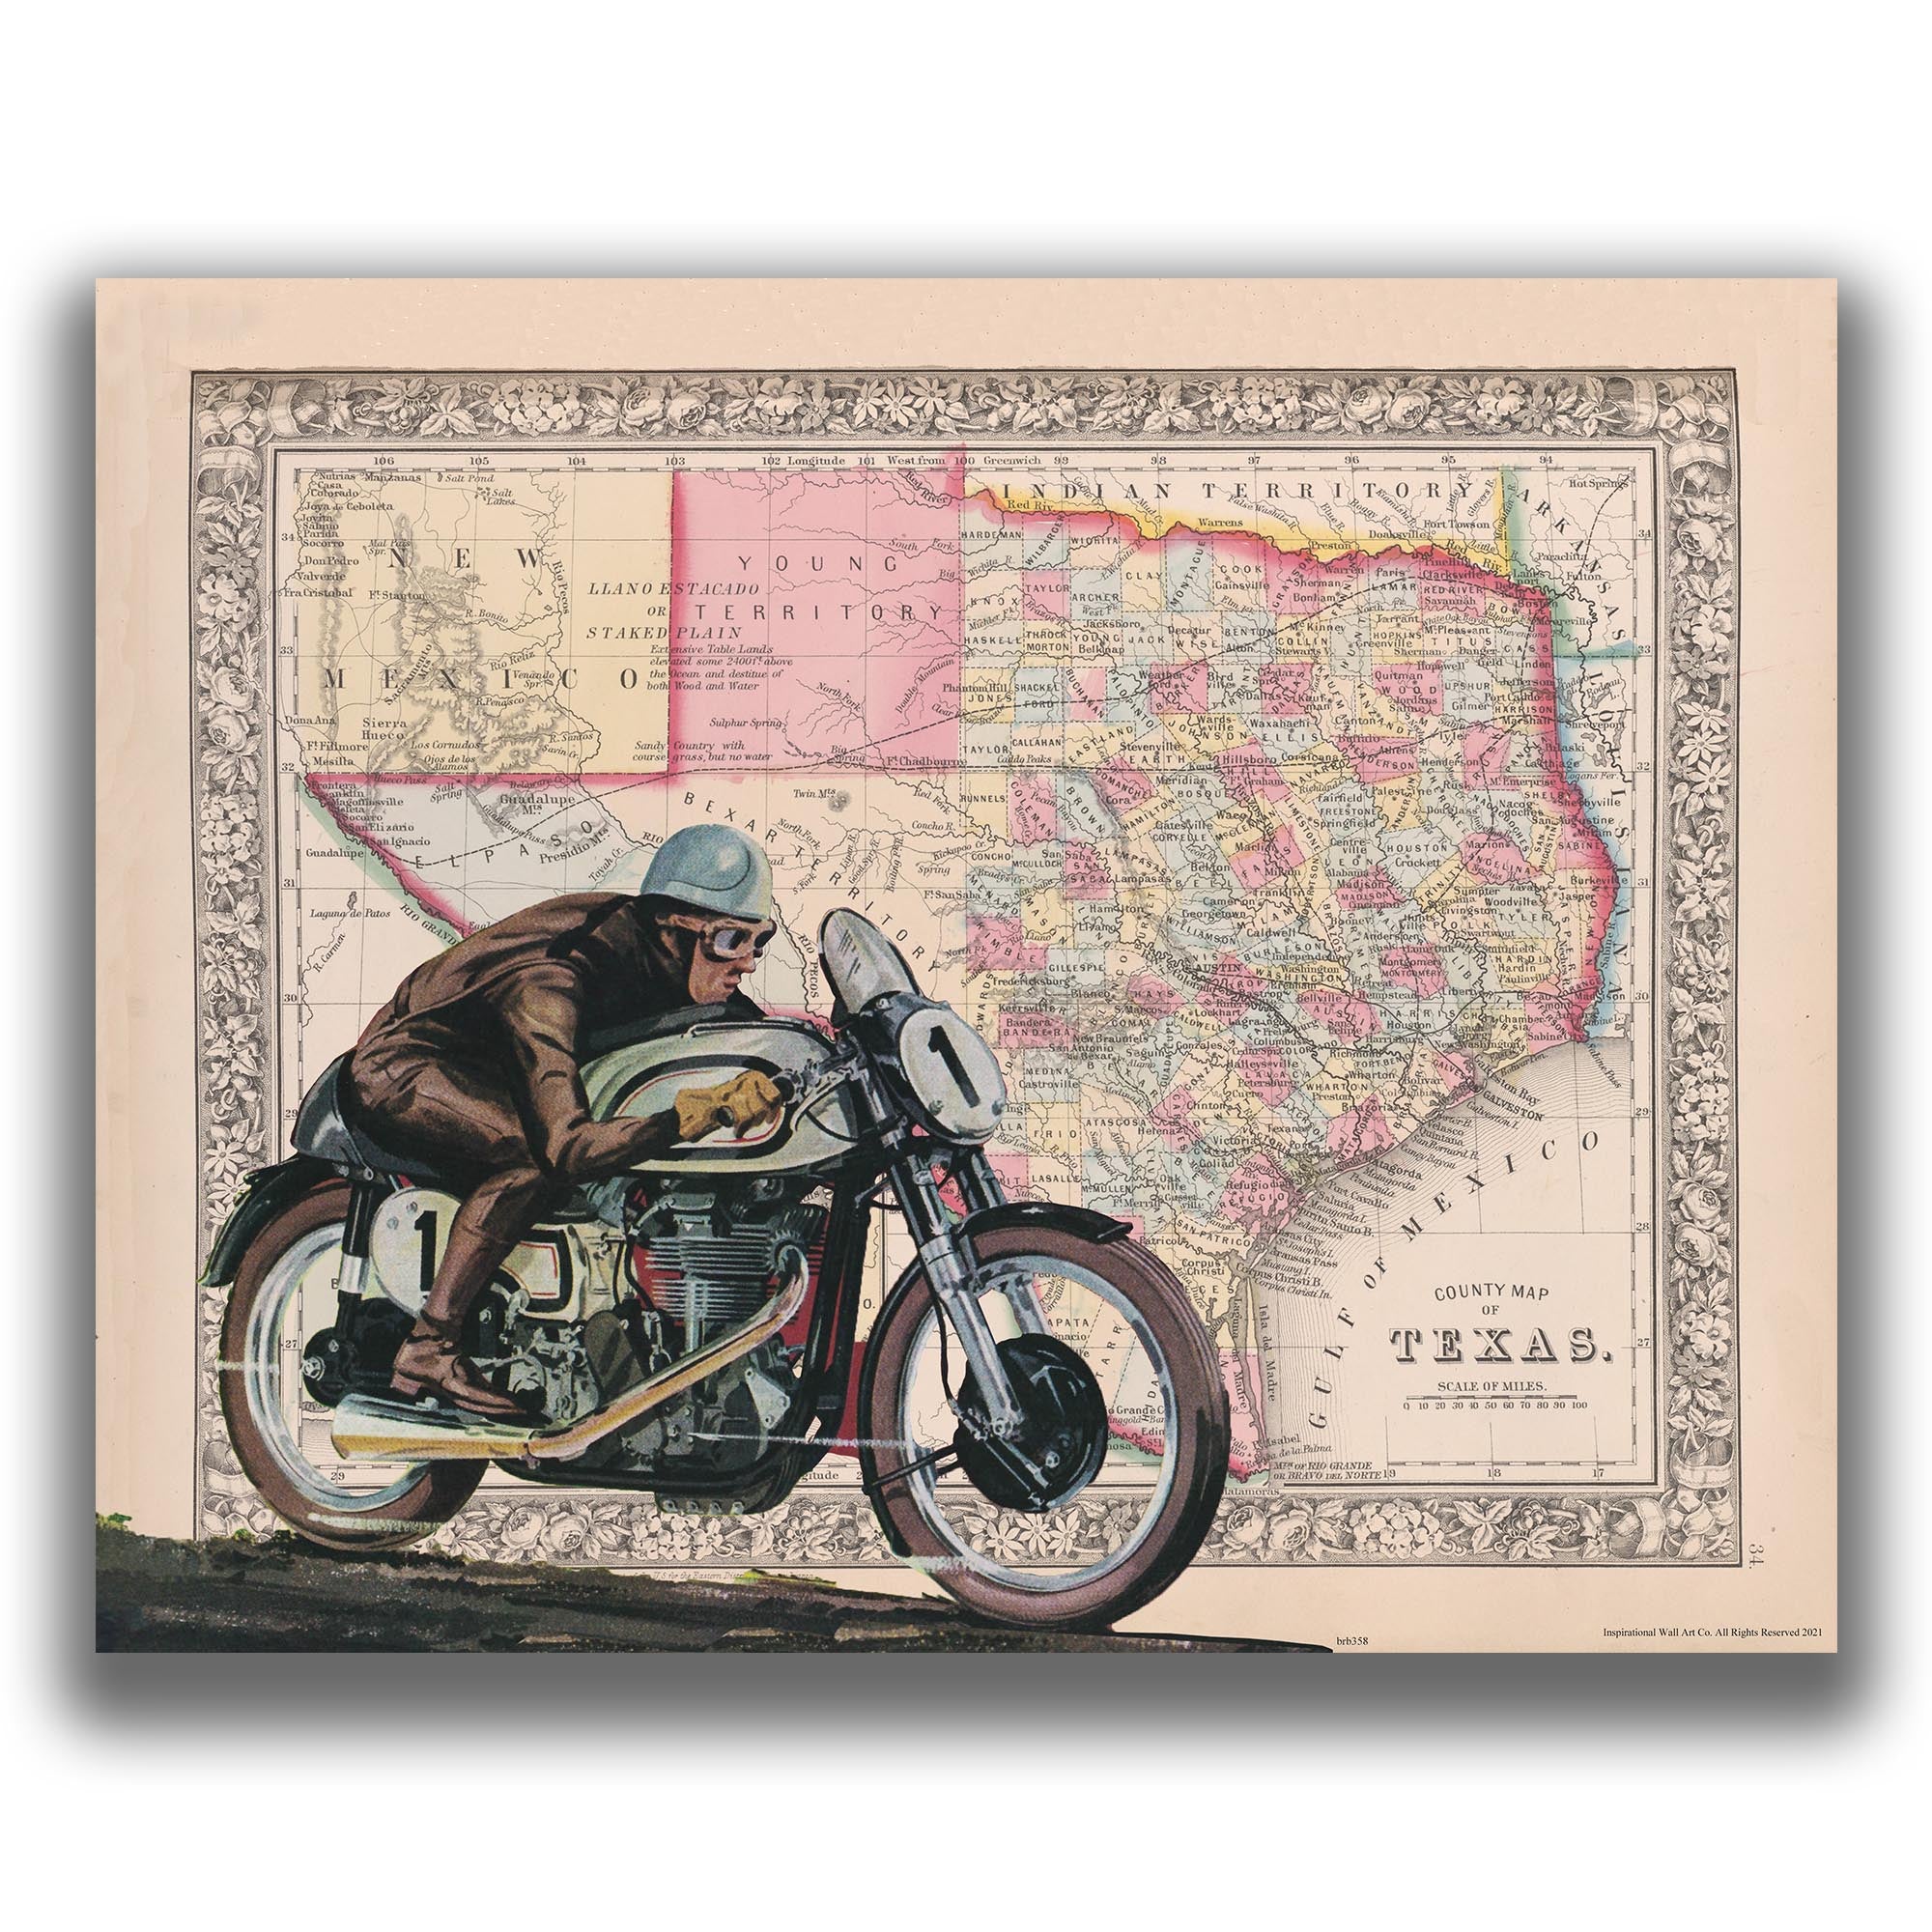 Texas - Motorcycle Poster